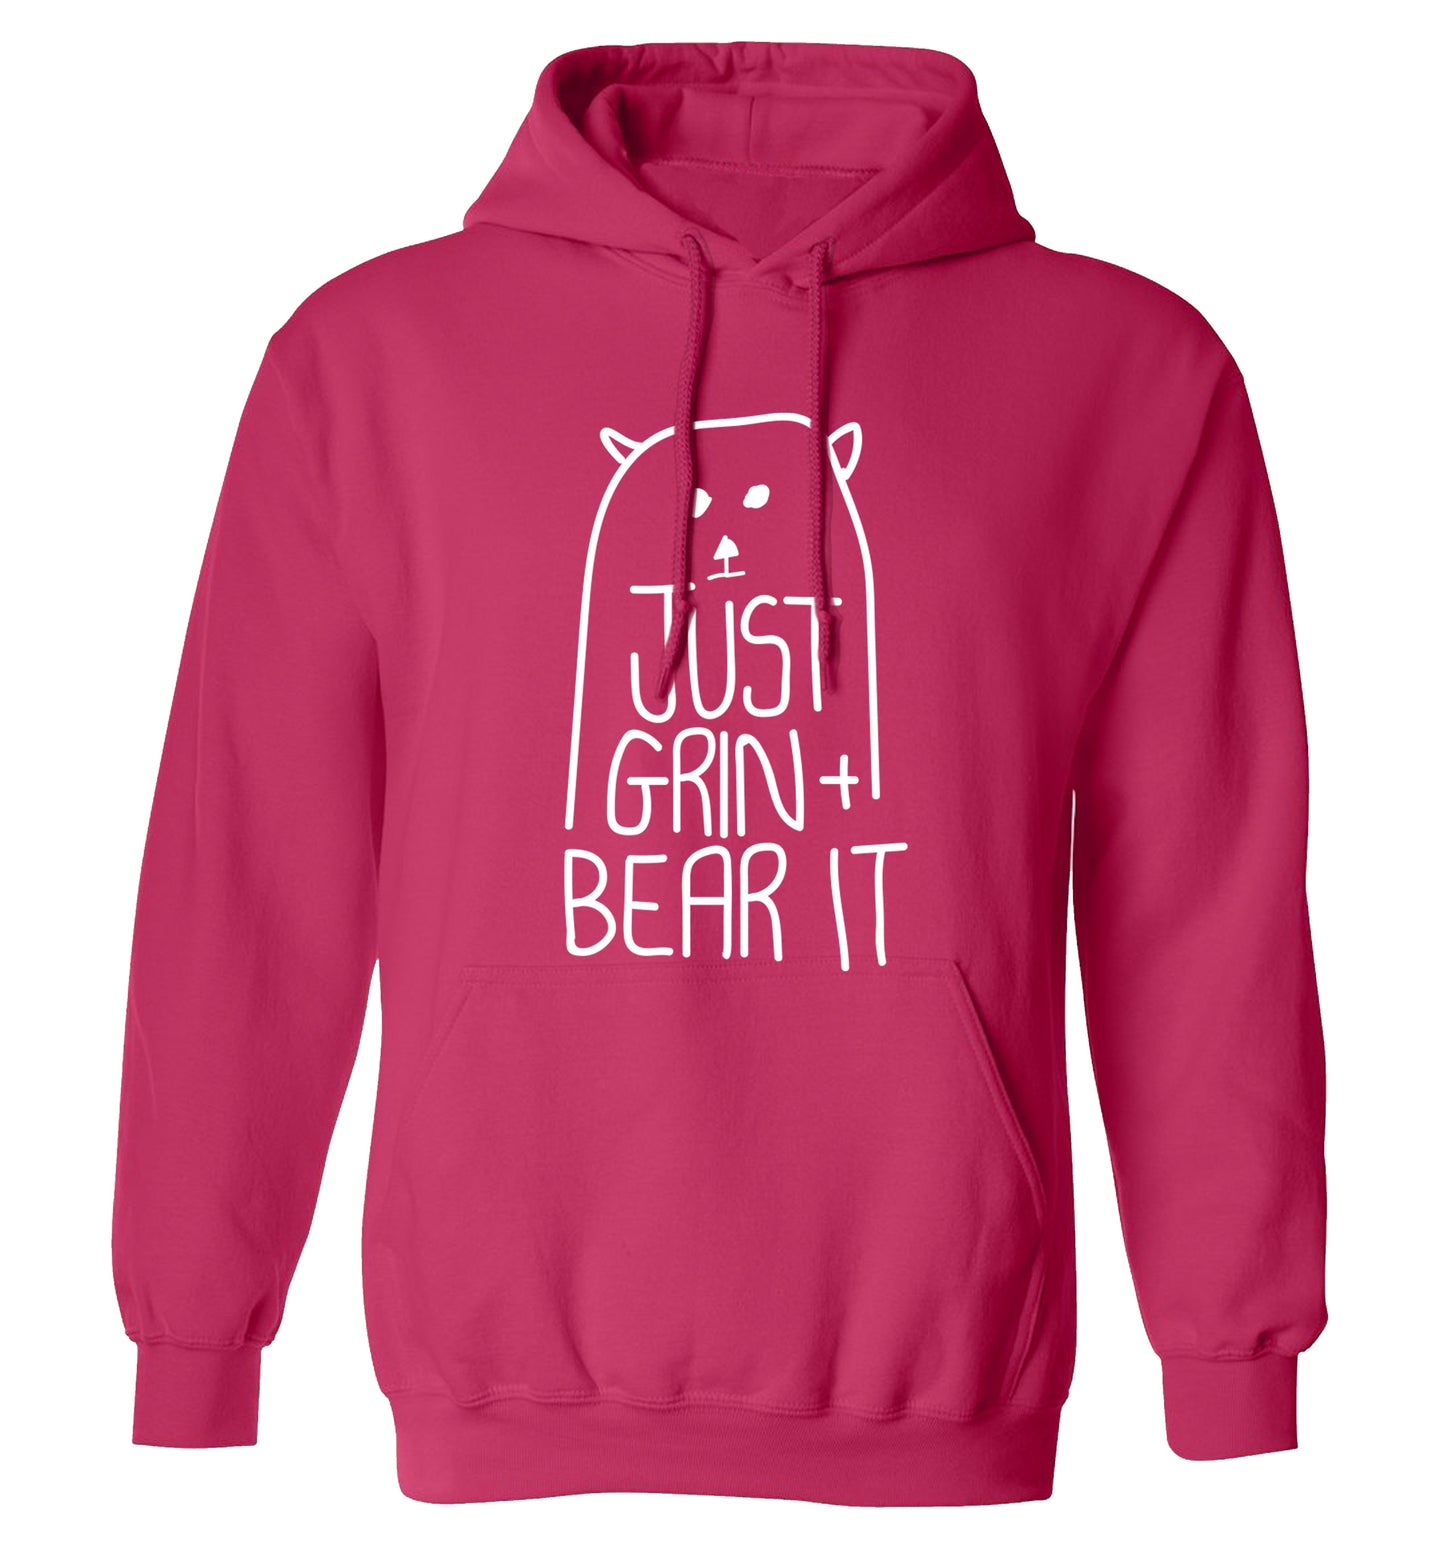 Just grin and bear it adults unisex pink hoodie 2XL